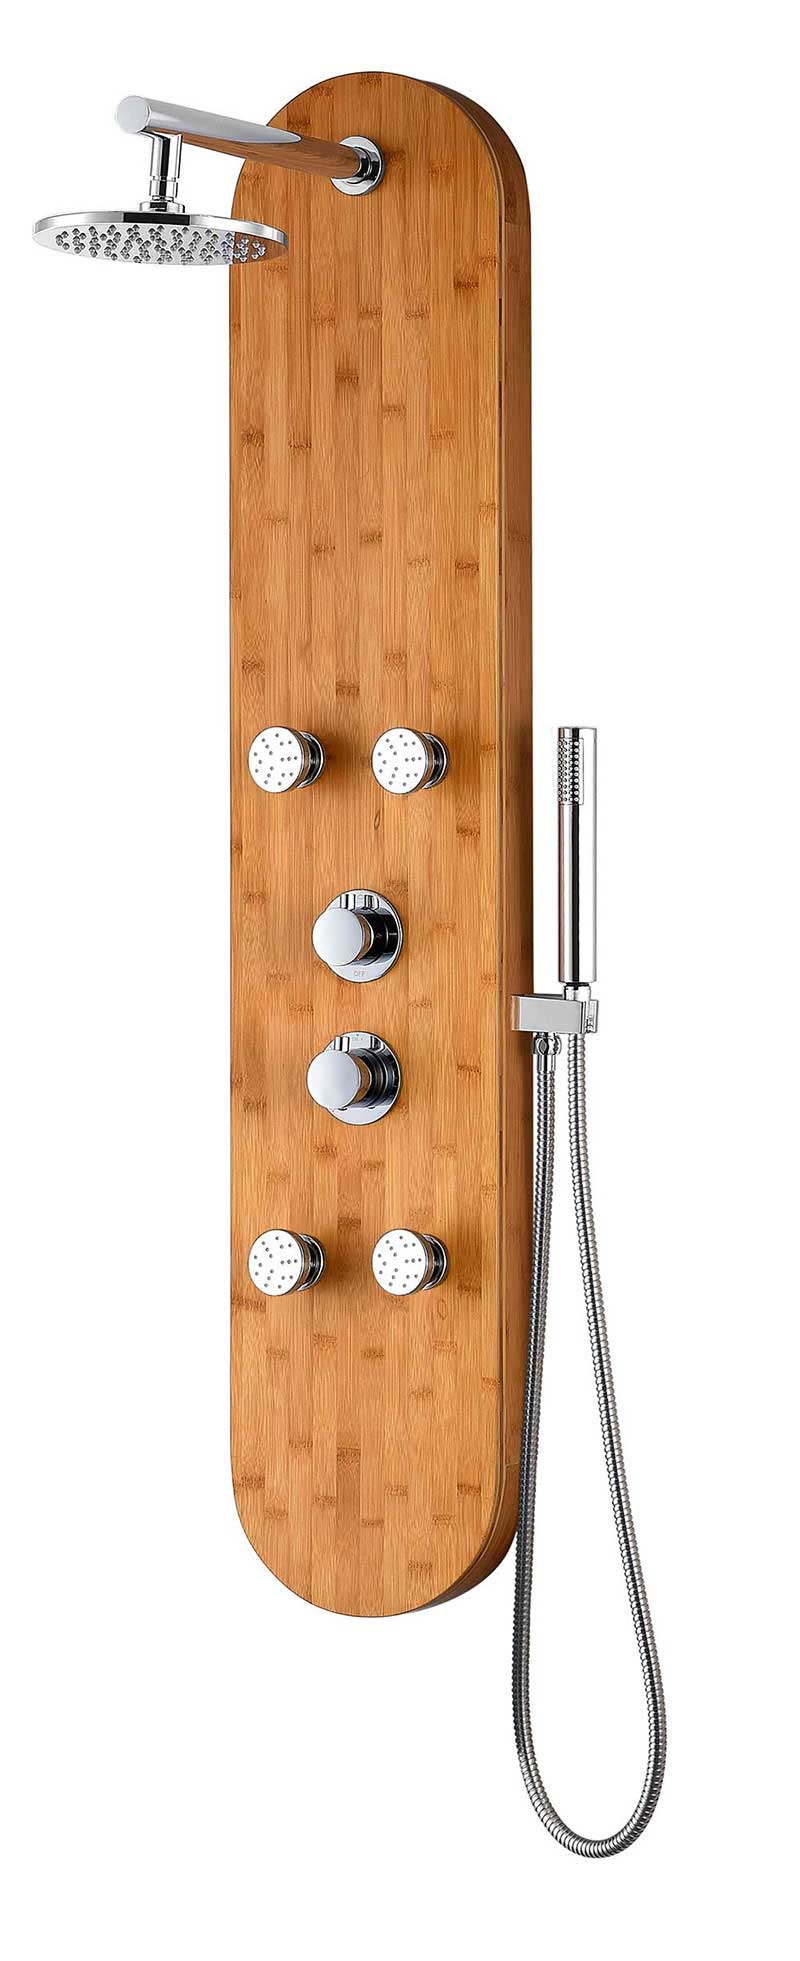 Anzzi CRANE Series 52 in. Full Body Shower Panel System with Heavy Rain Shower and Spray Wand in Natural Bamboo